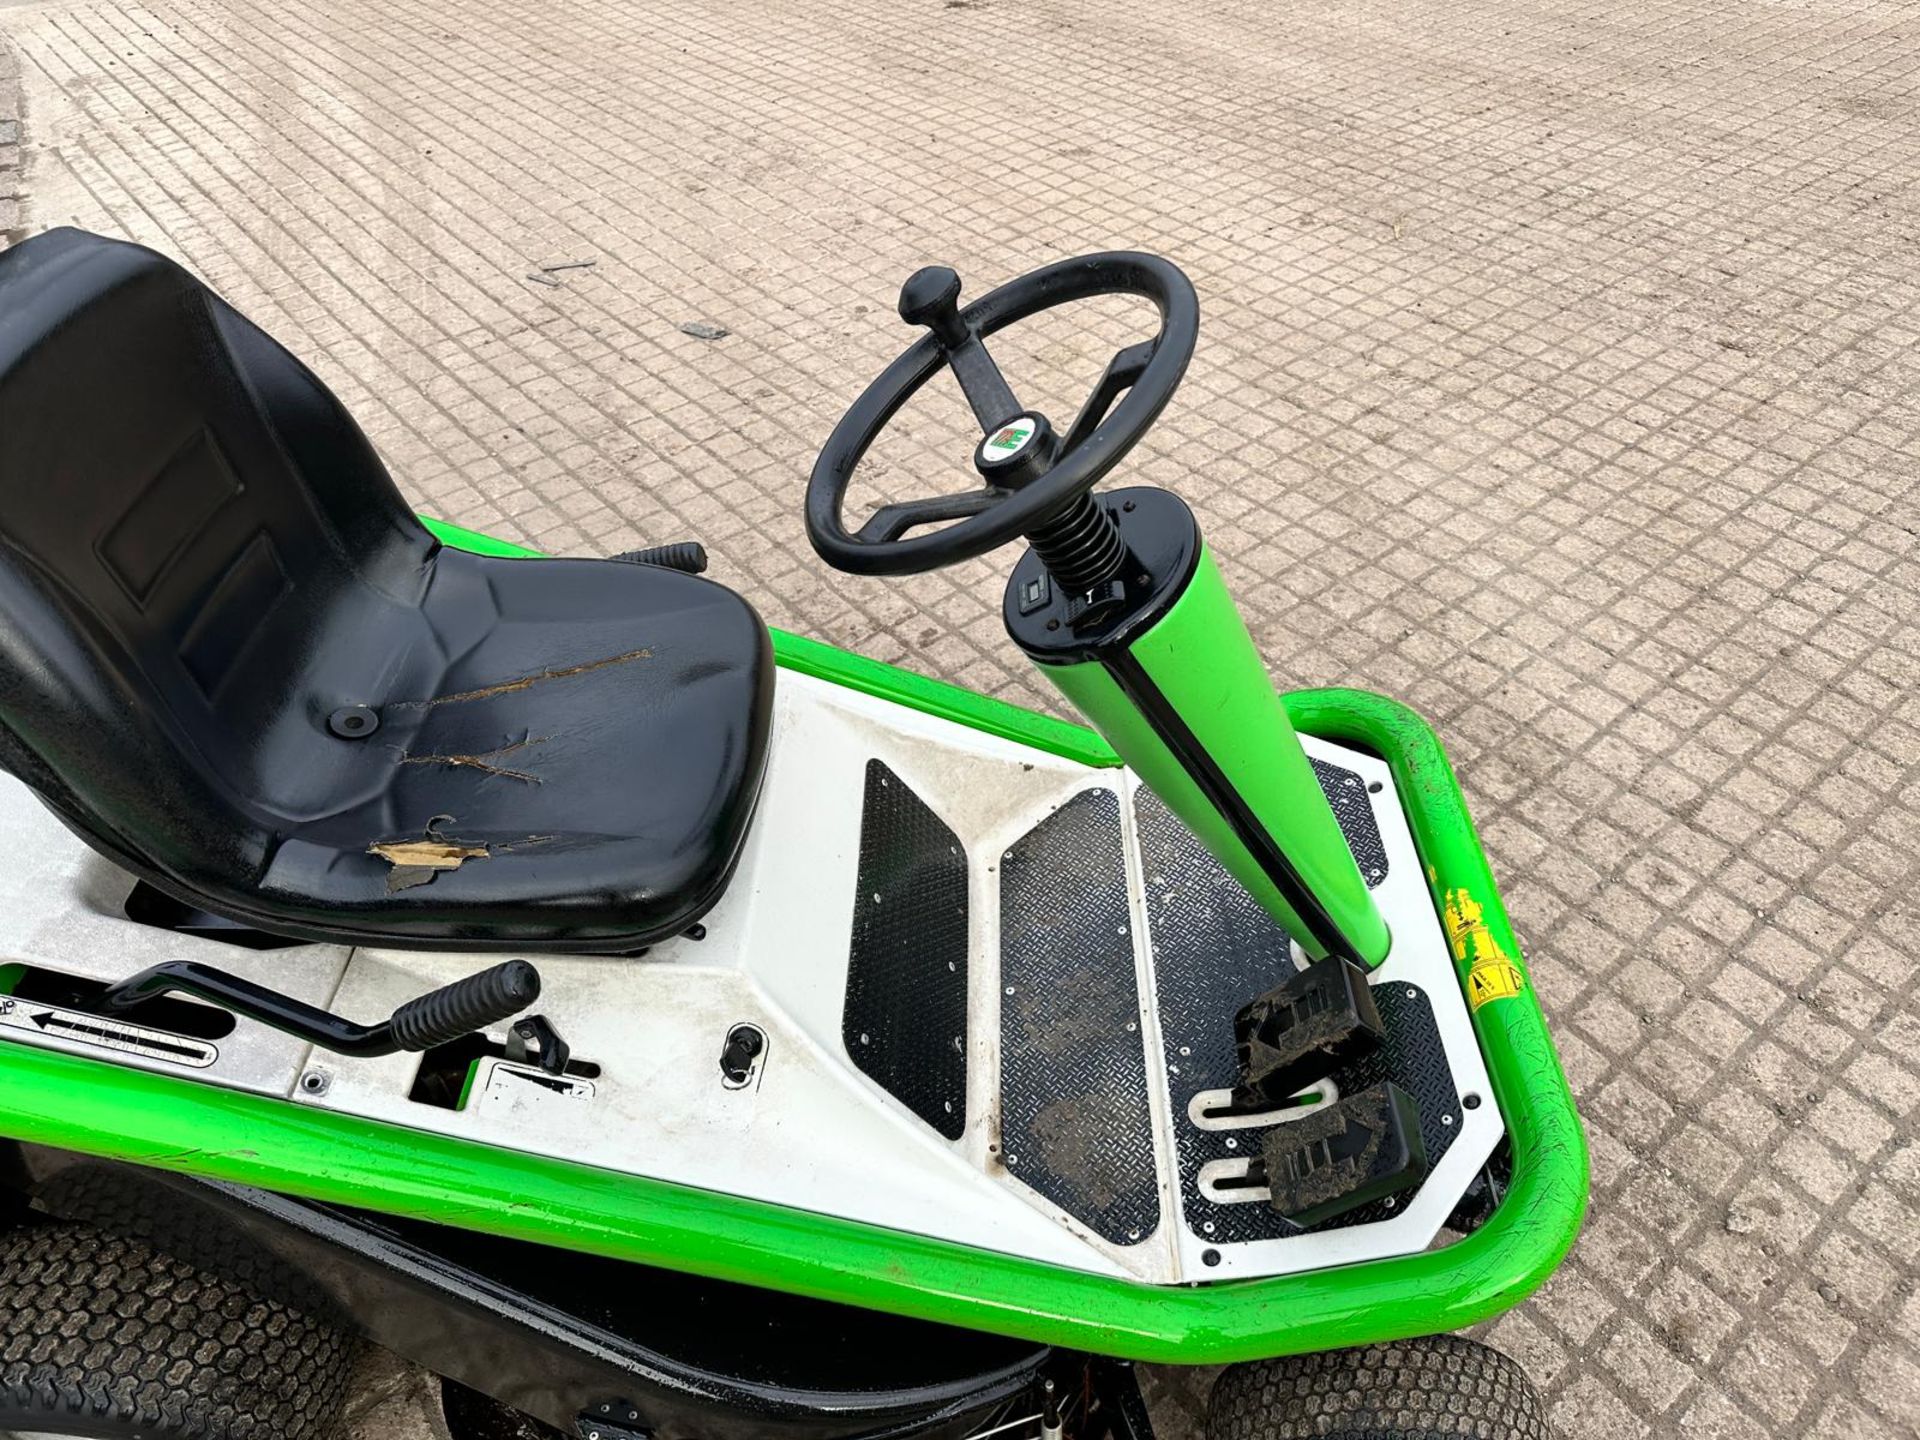 ETESIA MKHP HYDRO 80 RIDE ON MOWER WITH REAR COLLECTOR *NO VAT* - Image 10 of 12